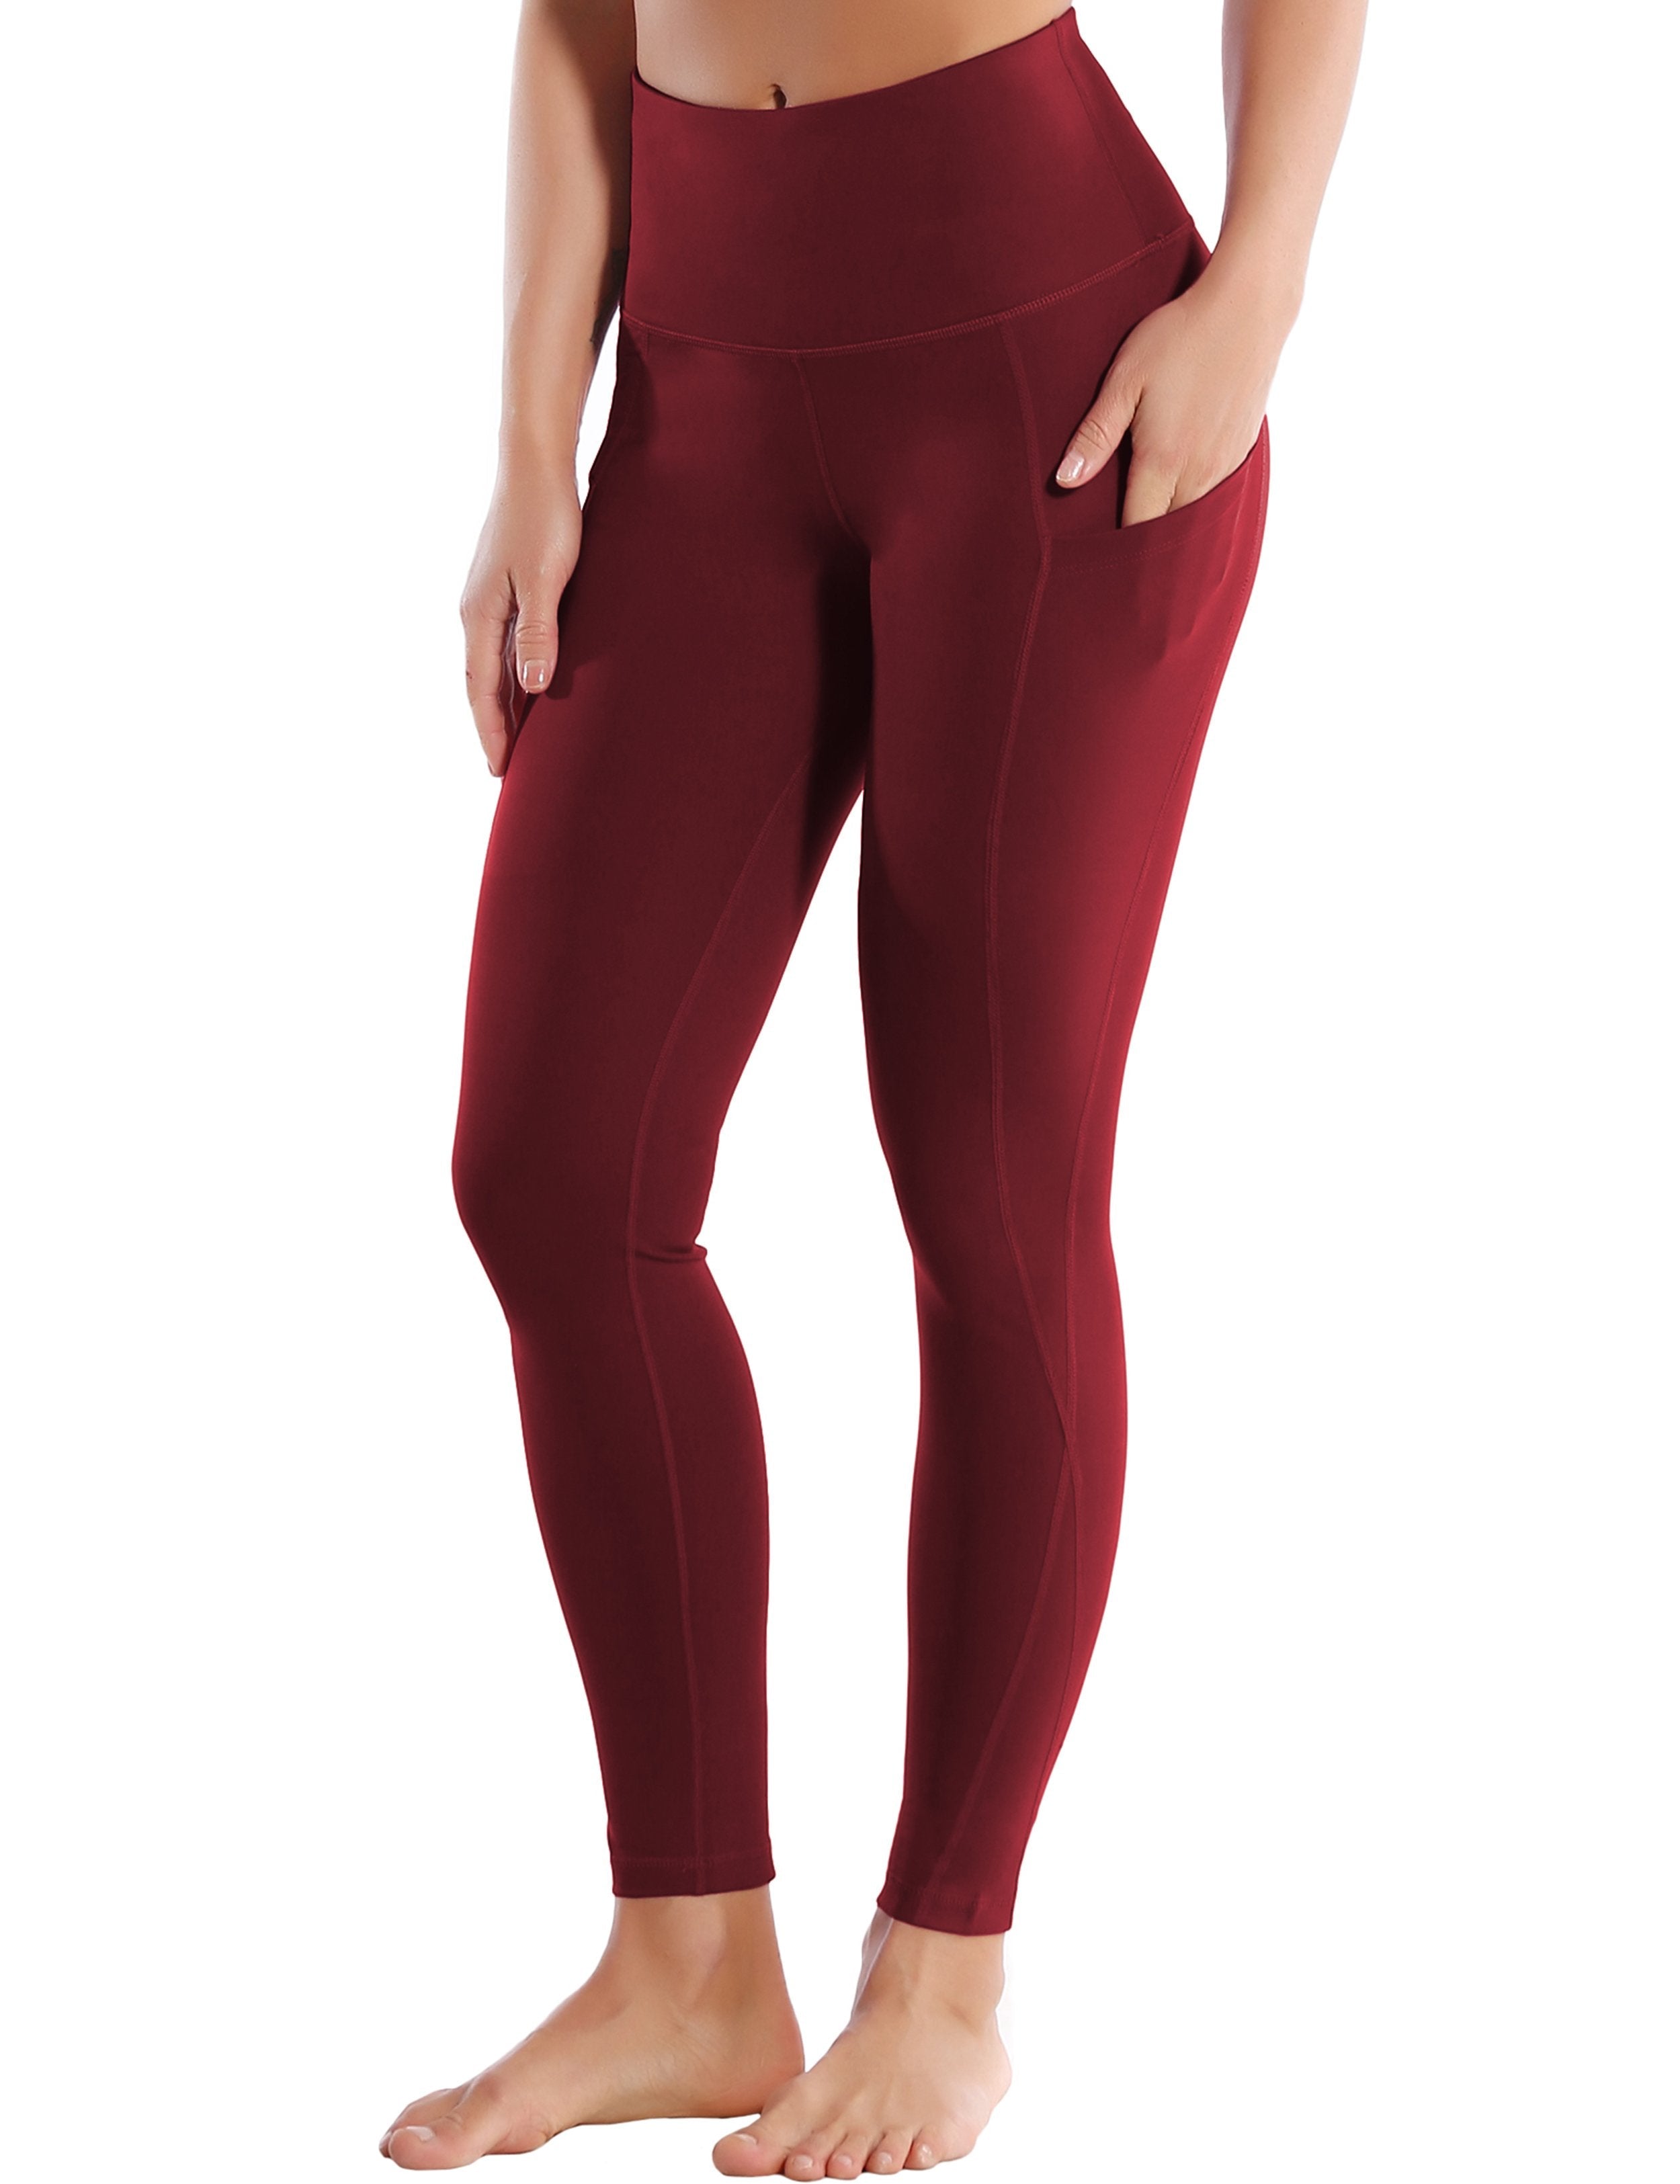 High Waist Side Pockets Plus Size Pants cherryred 75% Nylon, 25% Spandex Fabric doesn't attract lint easily 4-way stretch No see-through Moisture-wicking Tummy control Inner pocket